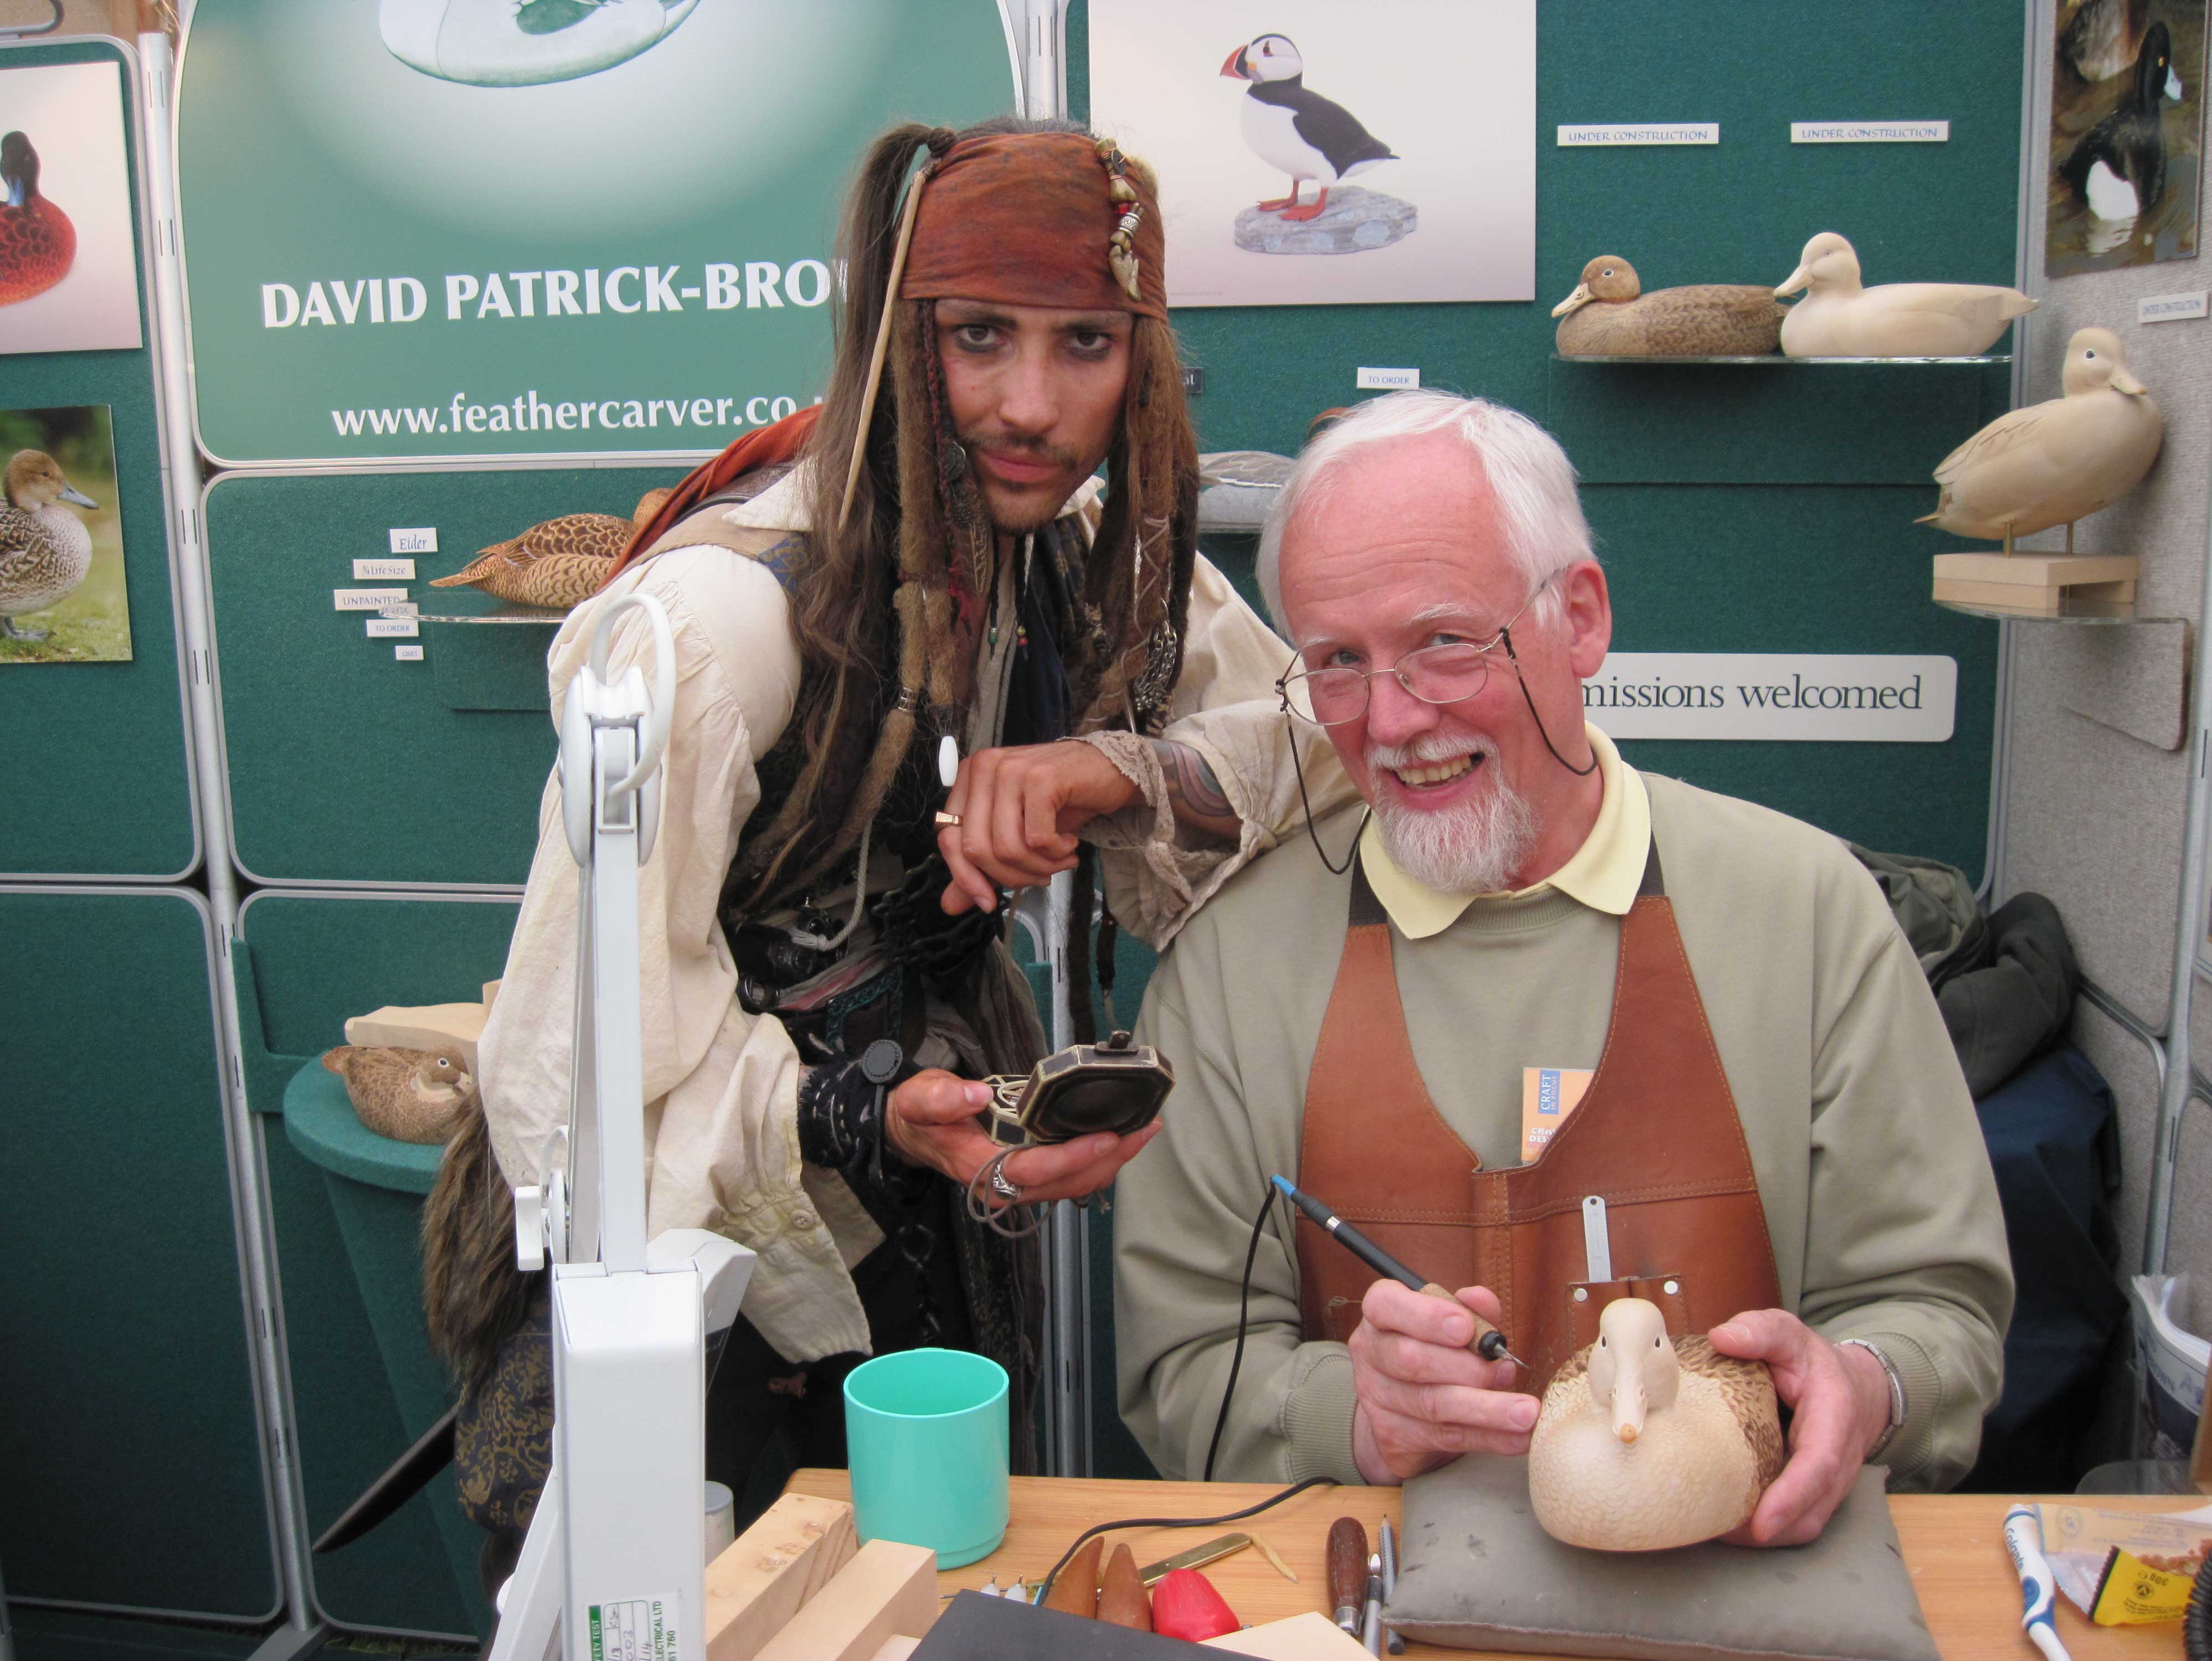 Feathercarver David Patrick-Brown with a visitor on his show stand